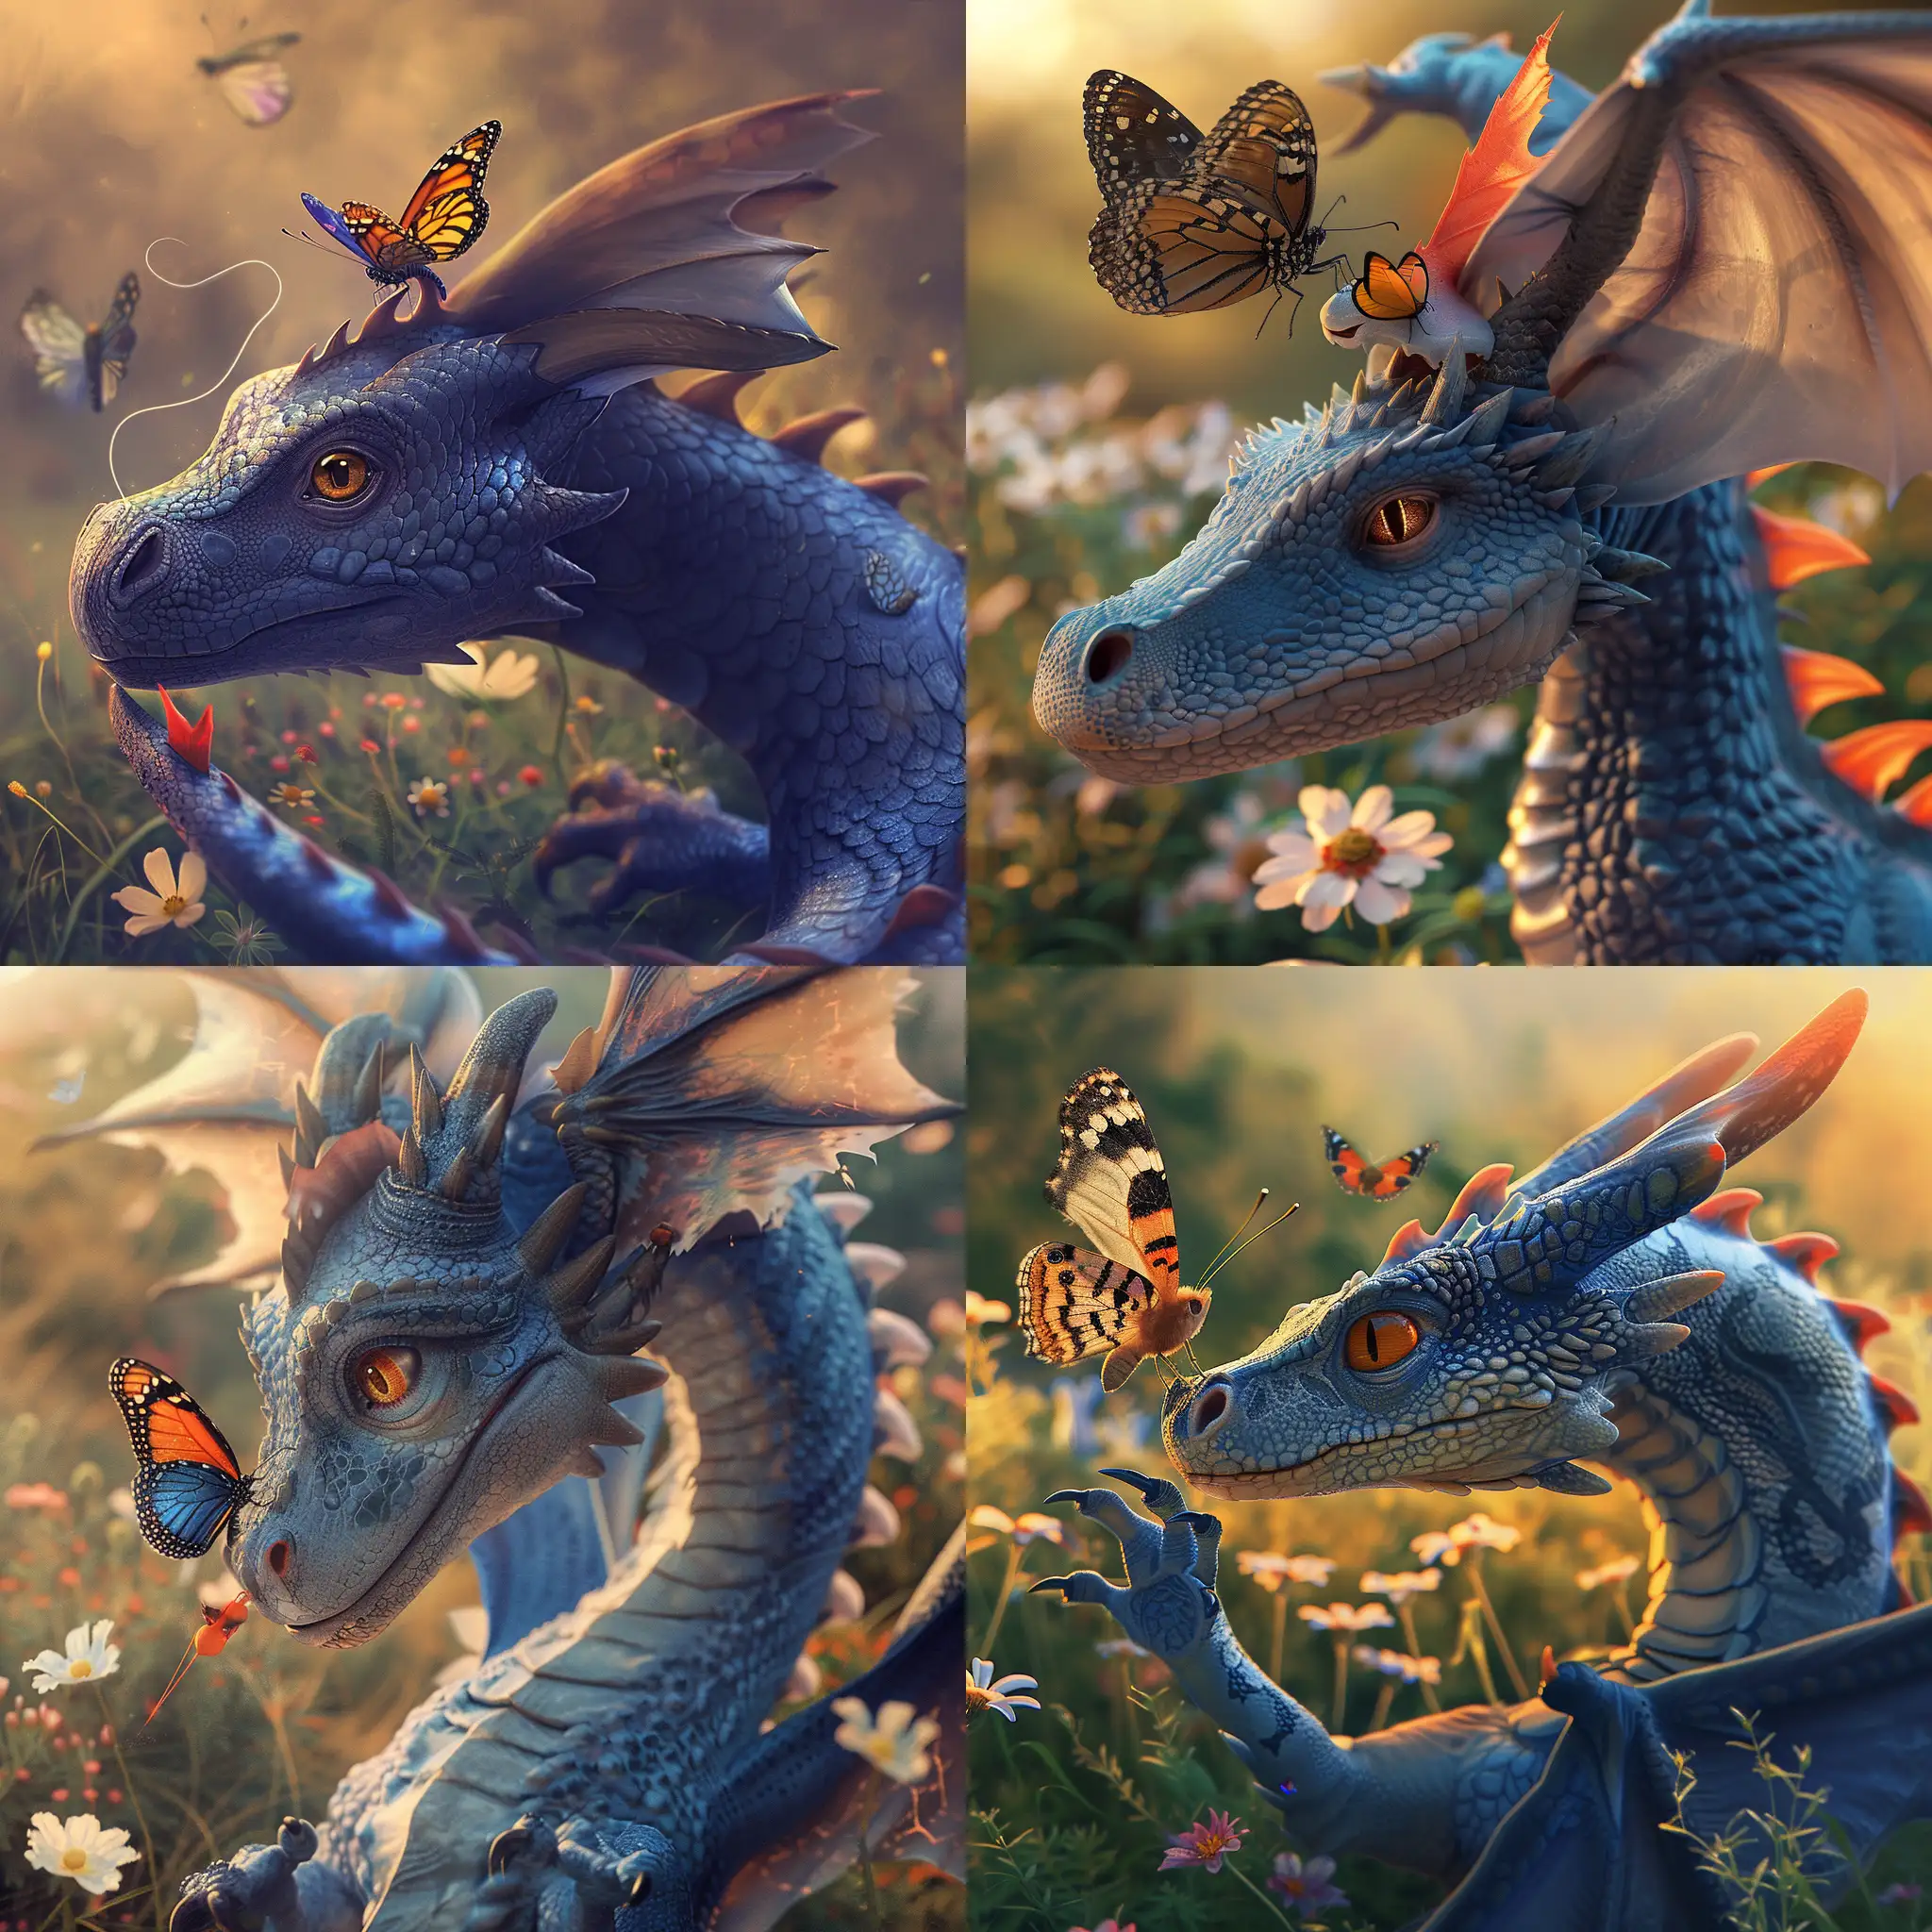 A large blue majestic dragon with a friendly face and warm brown eyes. It wings and outstretched on its tail has a red point at the end. Sitting on its nose is colourful butterfly. They are in a flowery meadow. Beautiful magical mysterious fantasy surreal highly detailed. Photographic 